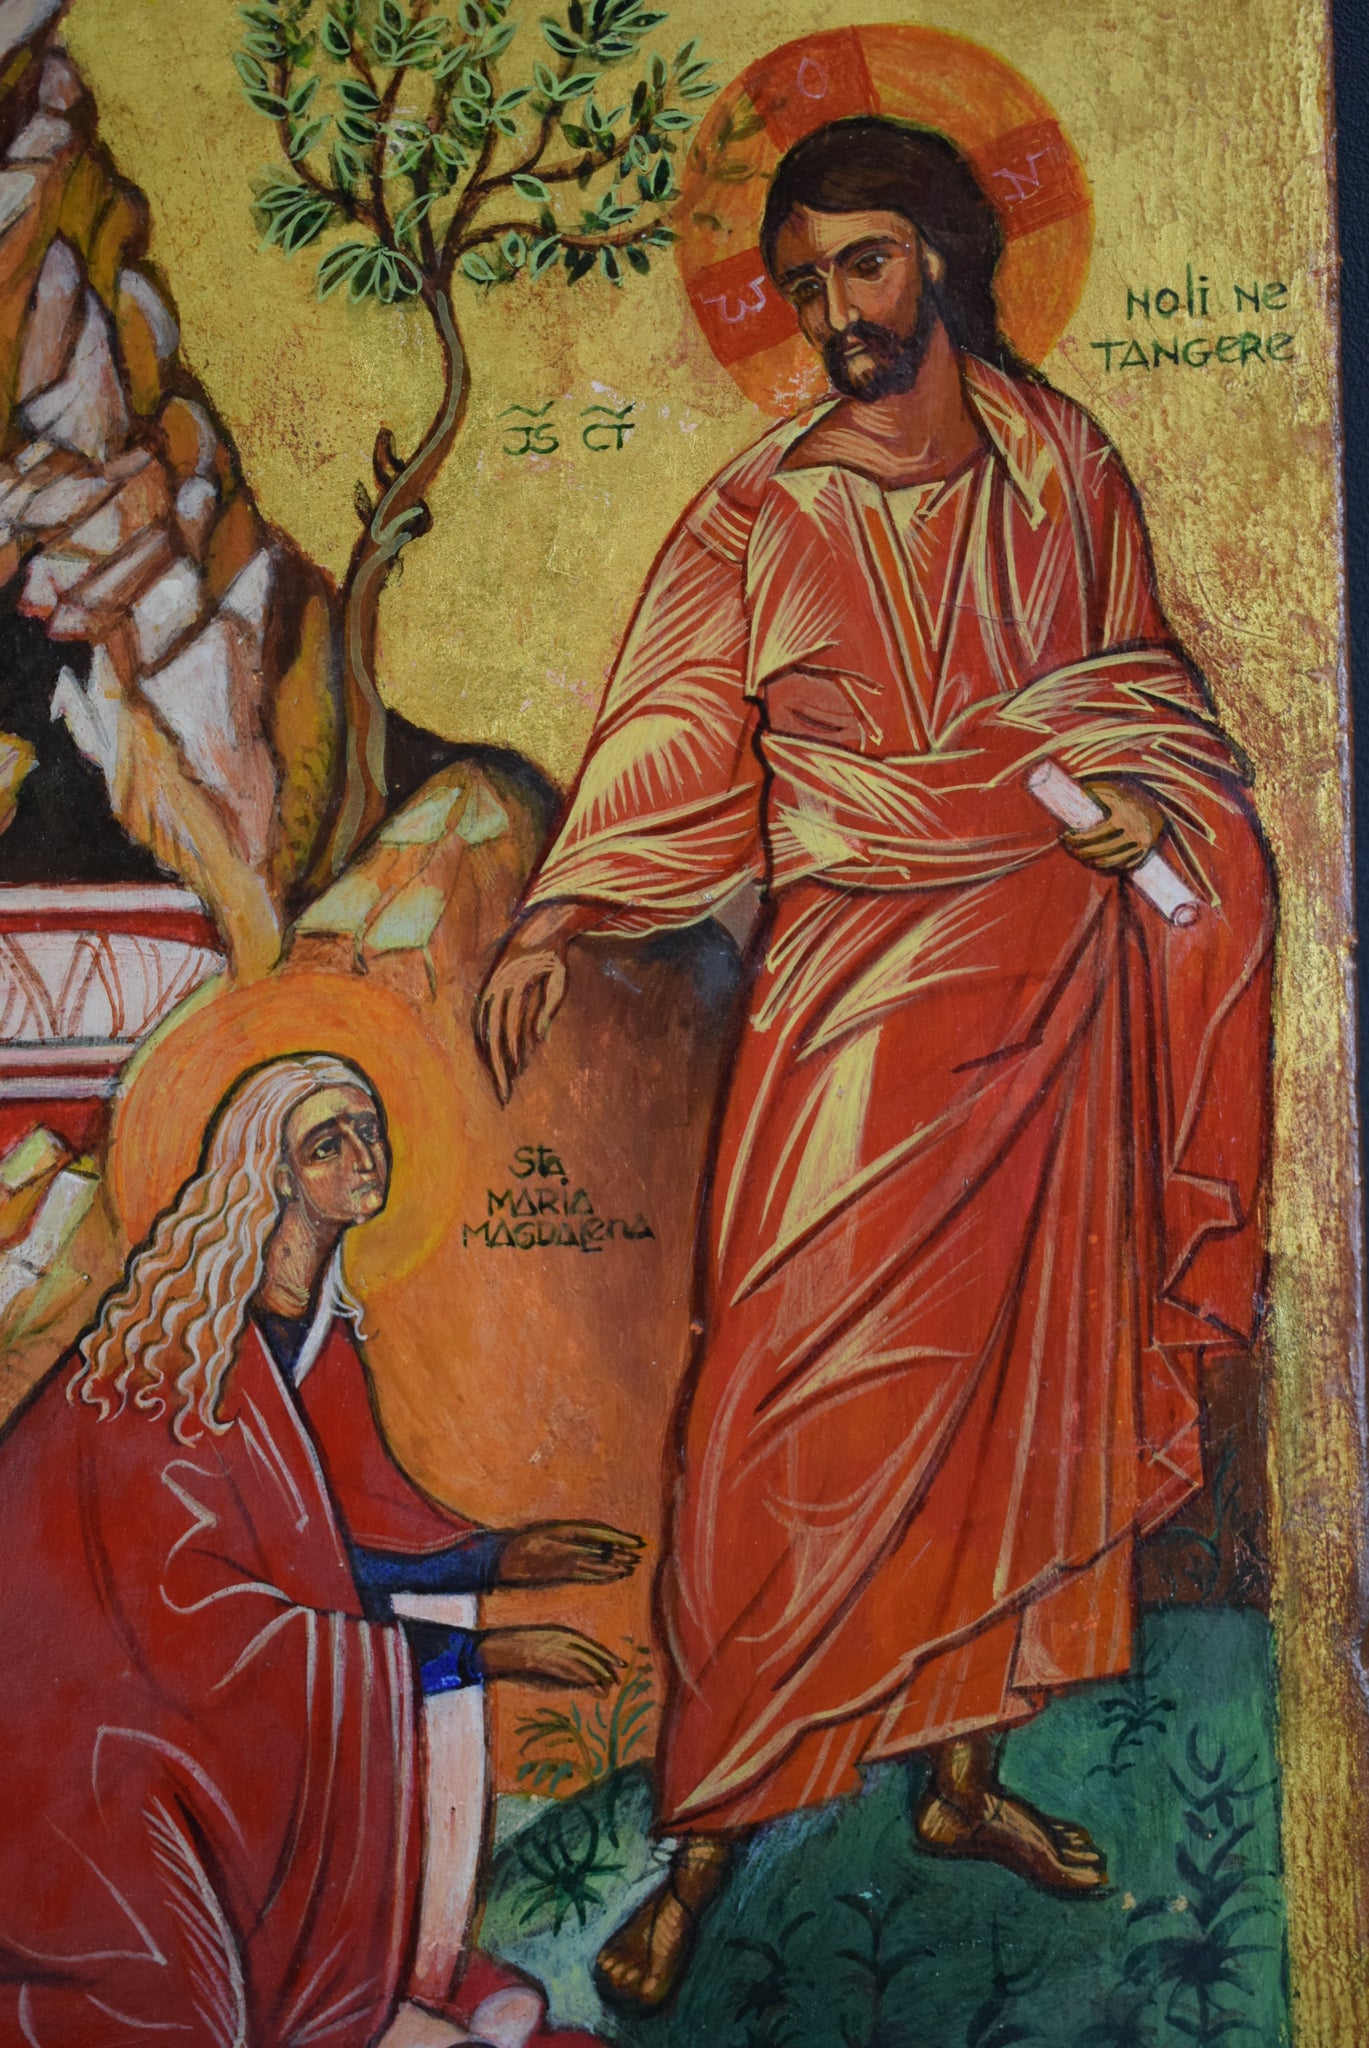 Vintage Jesus & Mary Magdalene in the Garden Greek Orthodox Icon Hand Painted on Wood Noli me Tangere